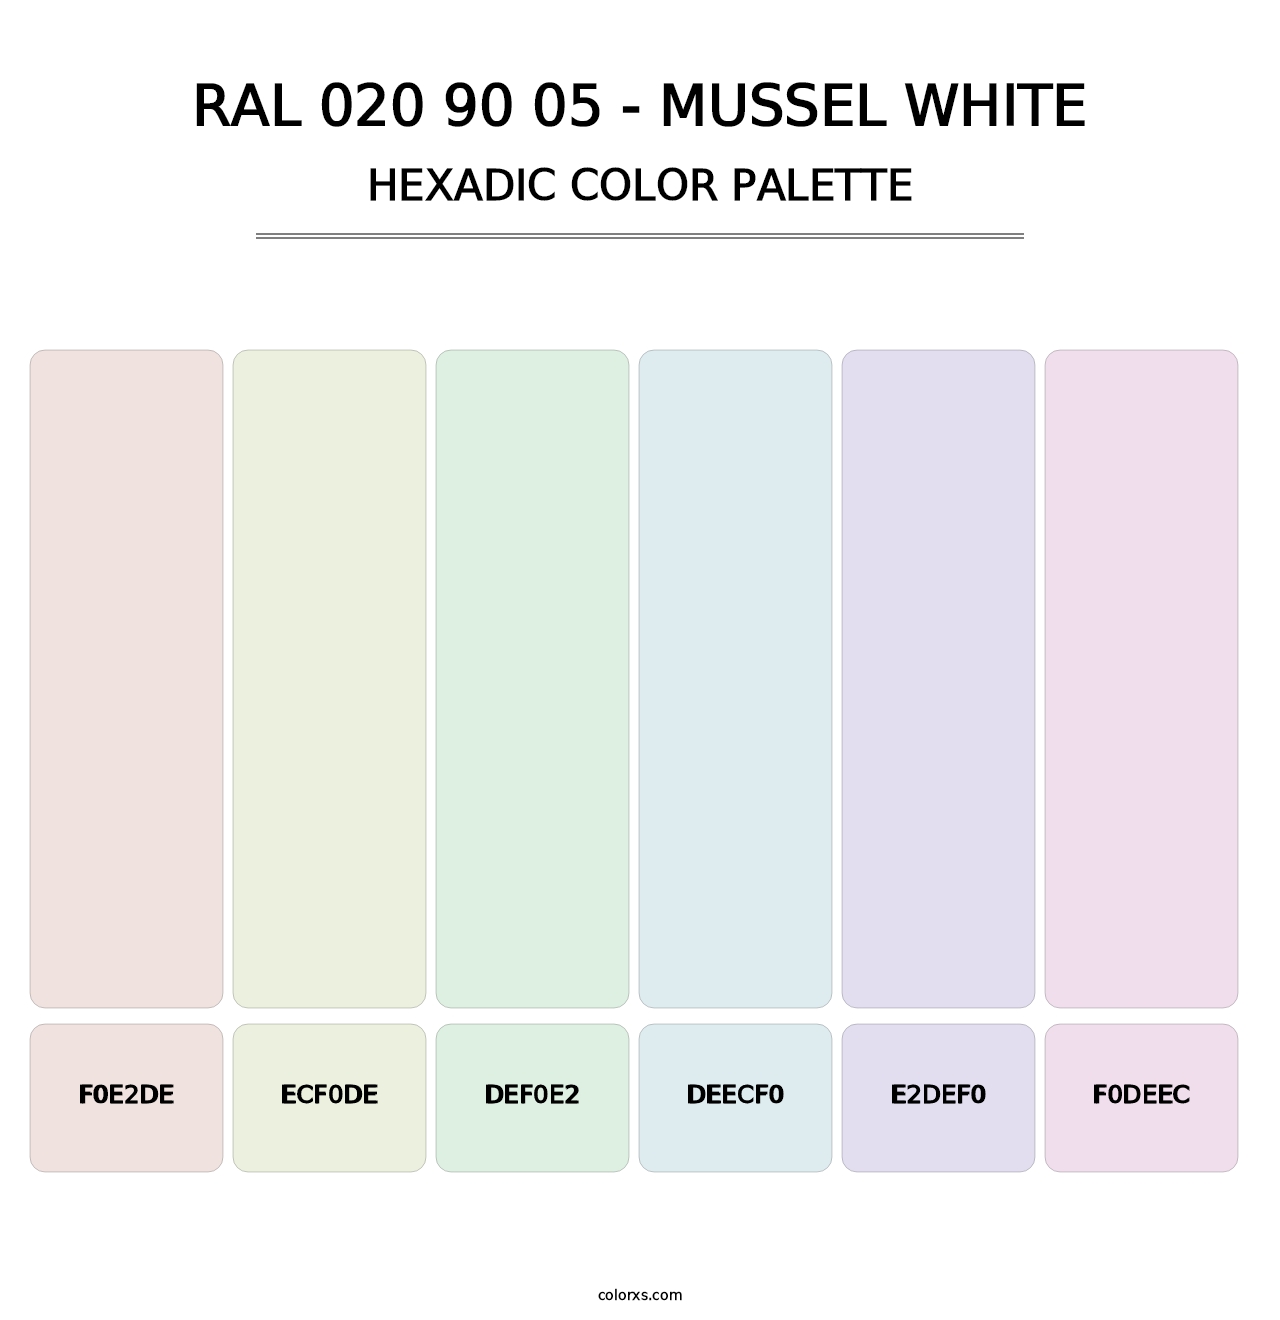 RAL 020 90 05 - Mussel White - Hexadic Color Palette